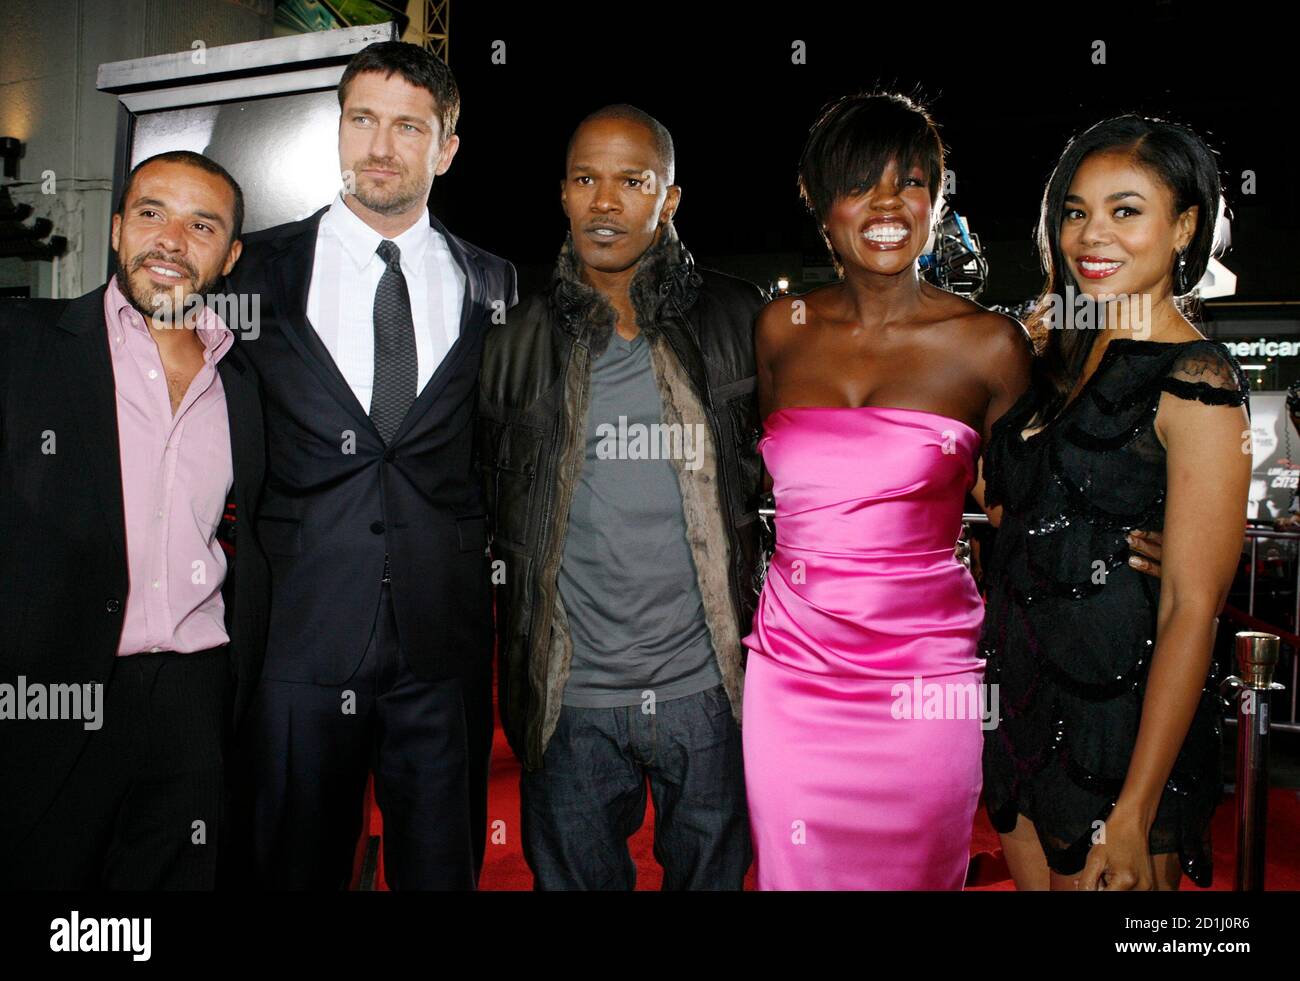 Cast members Michael Irby, Gerard Butler, Jamie Foxx, Viola Davis and  Regina Hall (L-R) pose at the premiere of their new film 